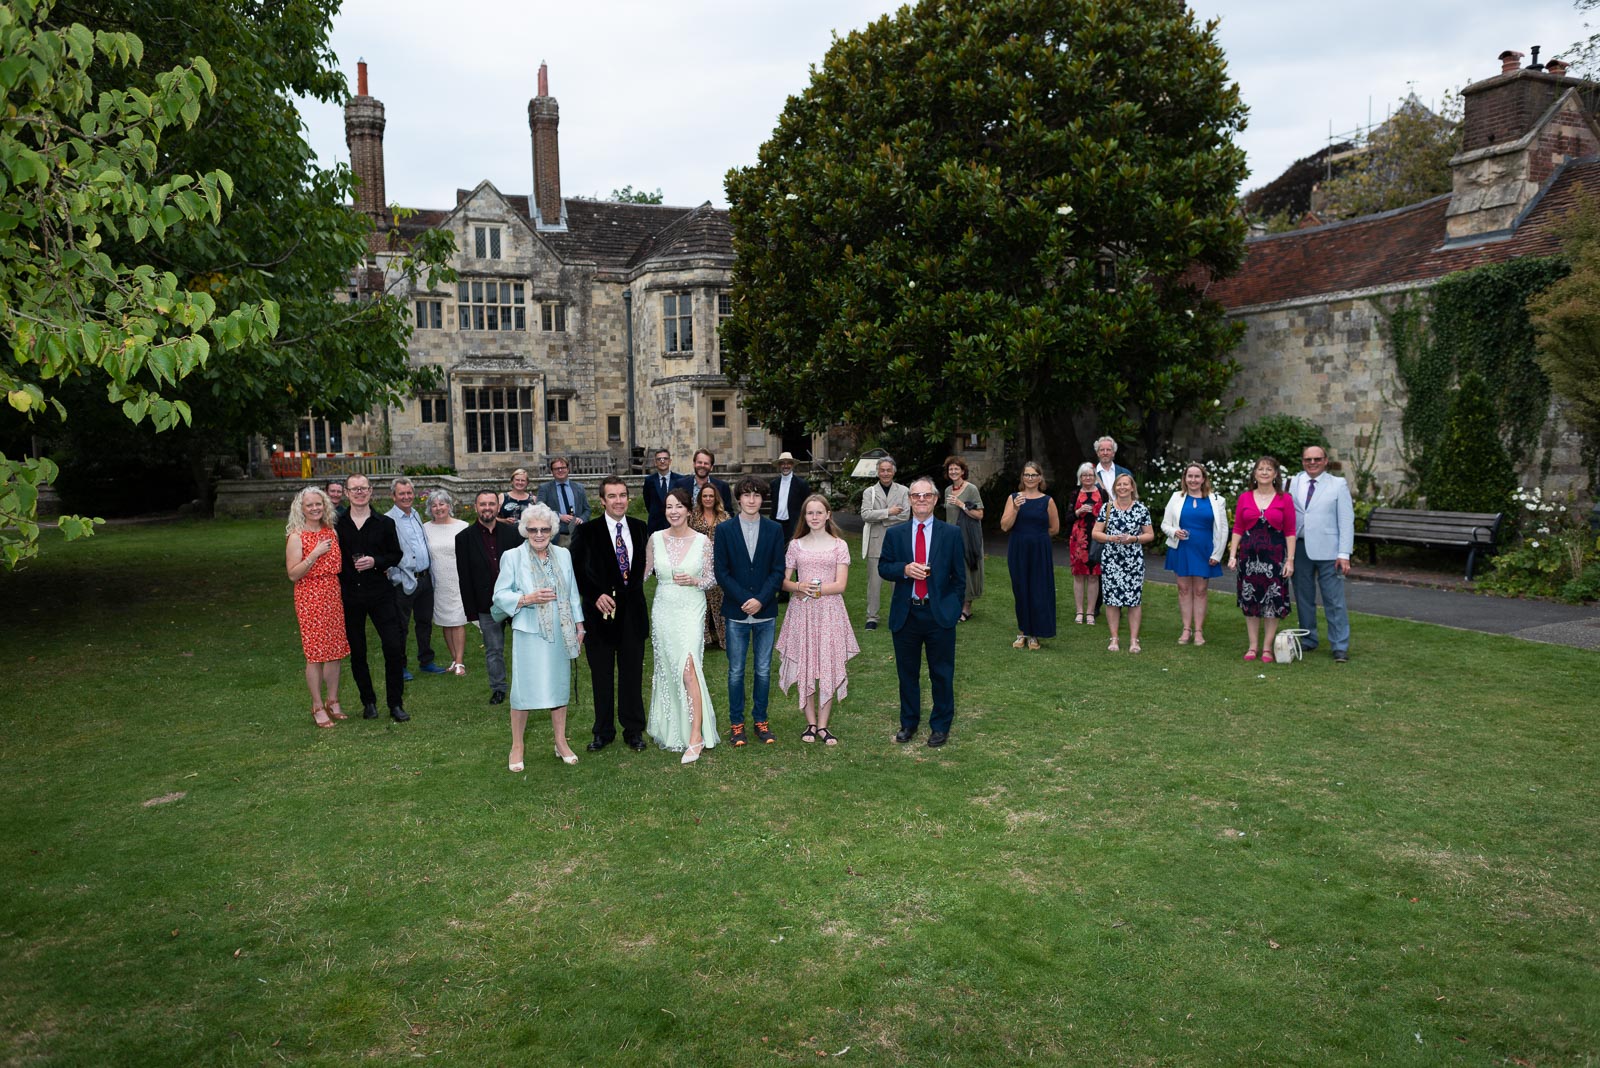 A large group photo of Fiona and Richard's wedding guests in Southover Grange, Lewes.